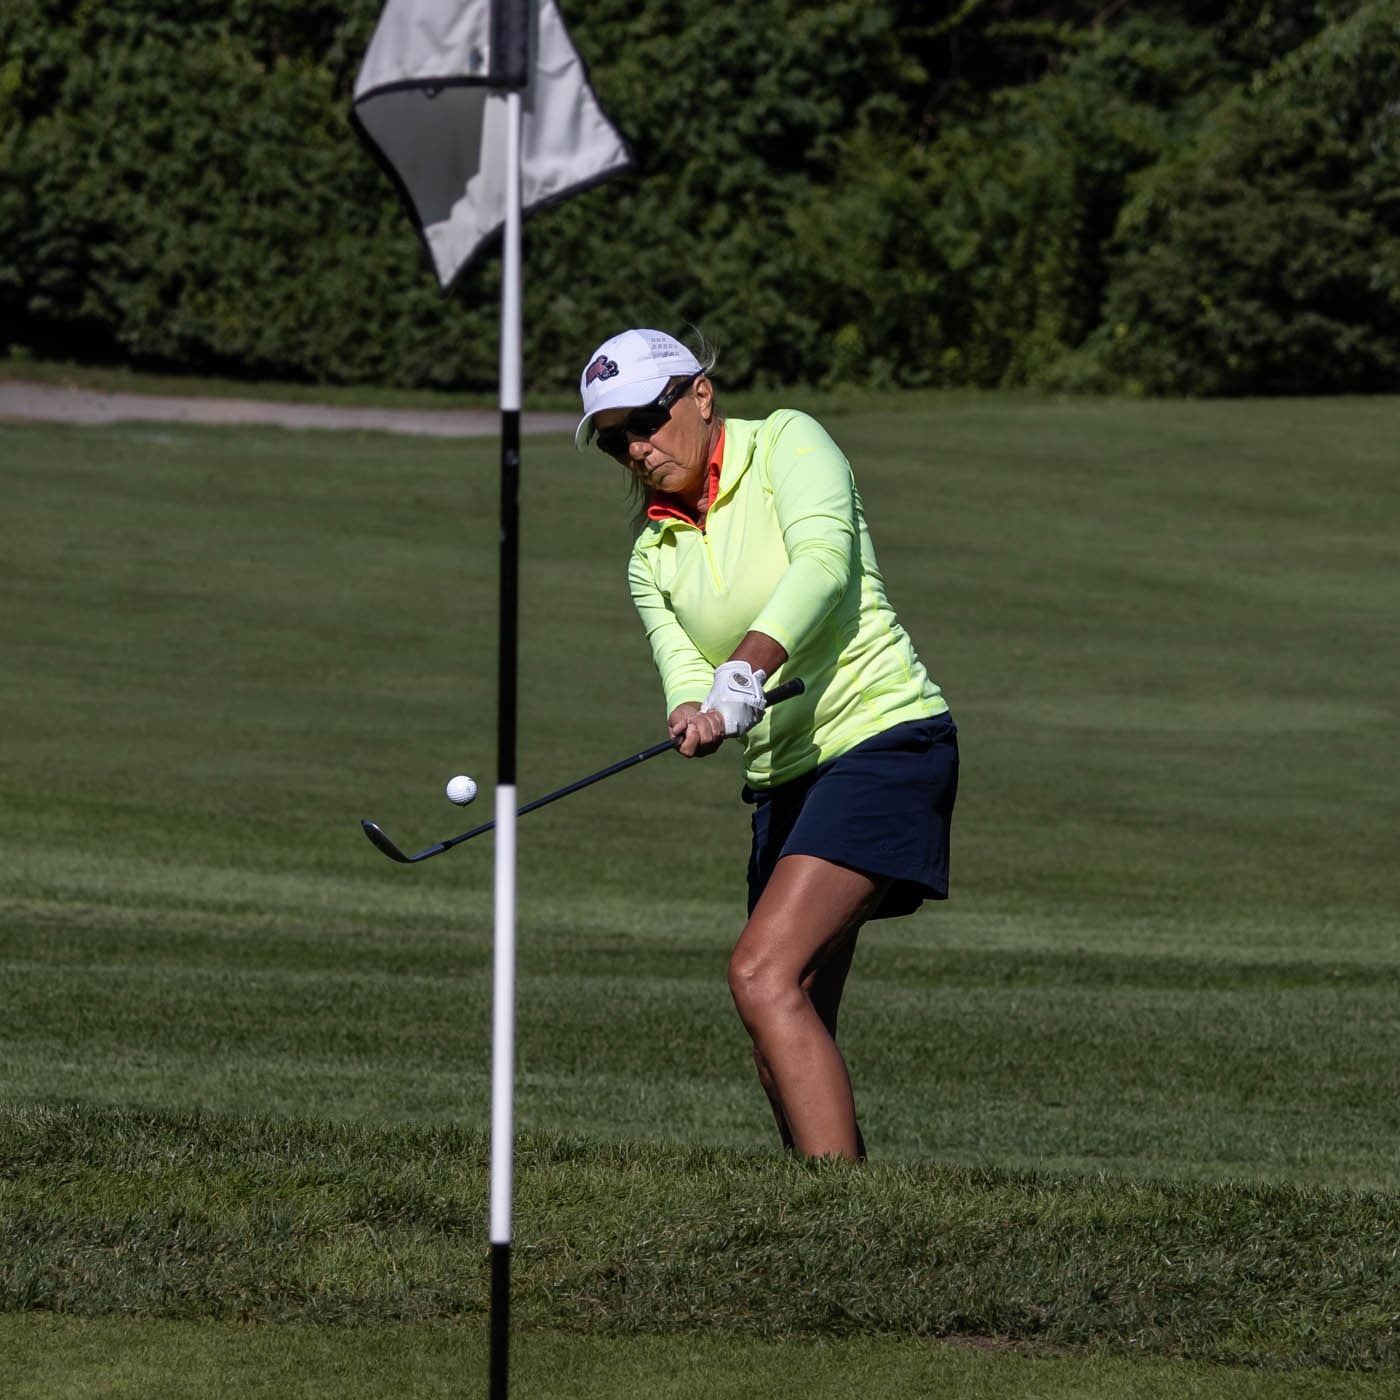 Country-Club-Of-New-Bedford FB-2023-Womens-FB-Gallery August-2023-Country-Club-Of-New-Bedford-FB-2023-Womens-FB-Gallery August-2023-Womens-FB-Gallery-Tuesday-Photos-Image-6